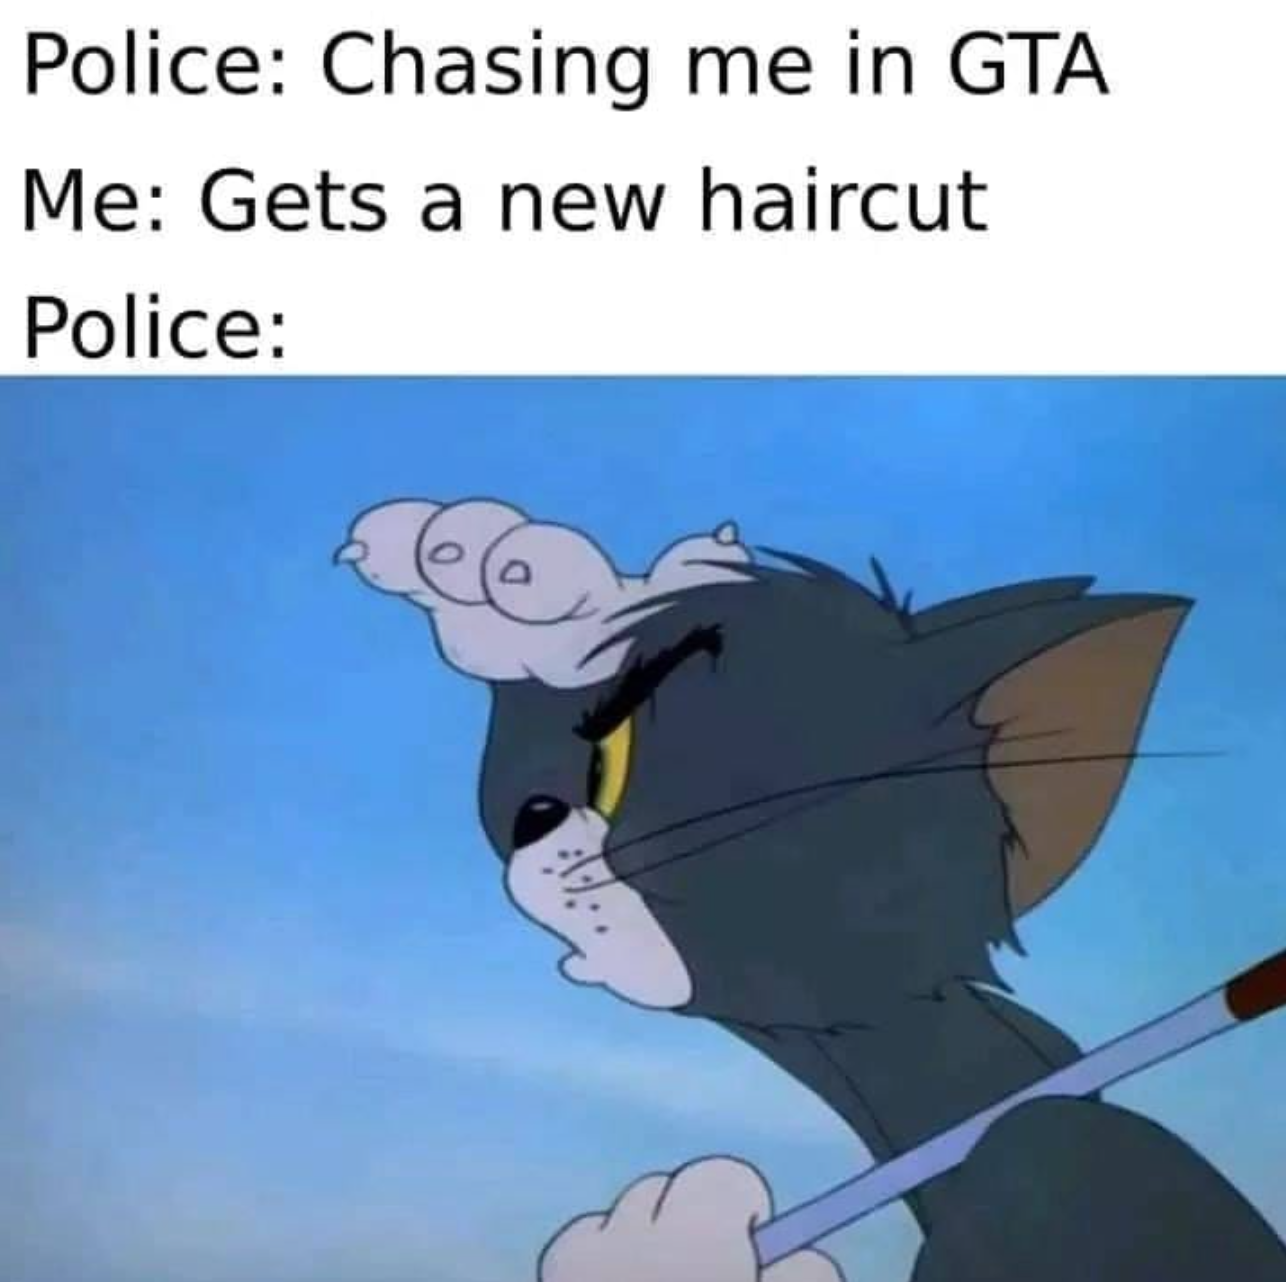 video game memes - tom and jerry golf - Police Chasing me in Gta Me Gets a new haircut Police 4